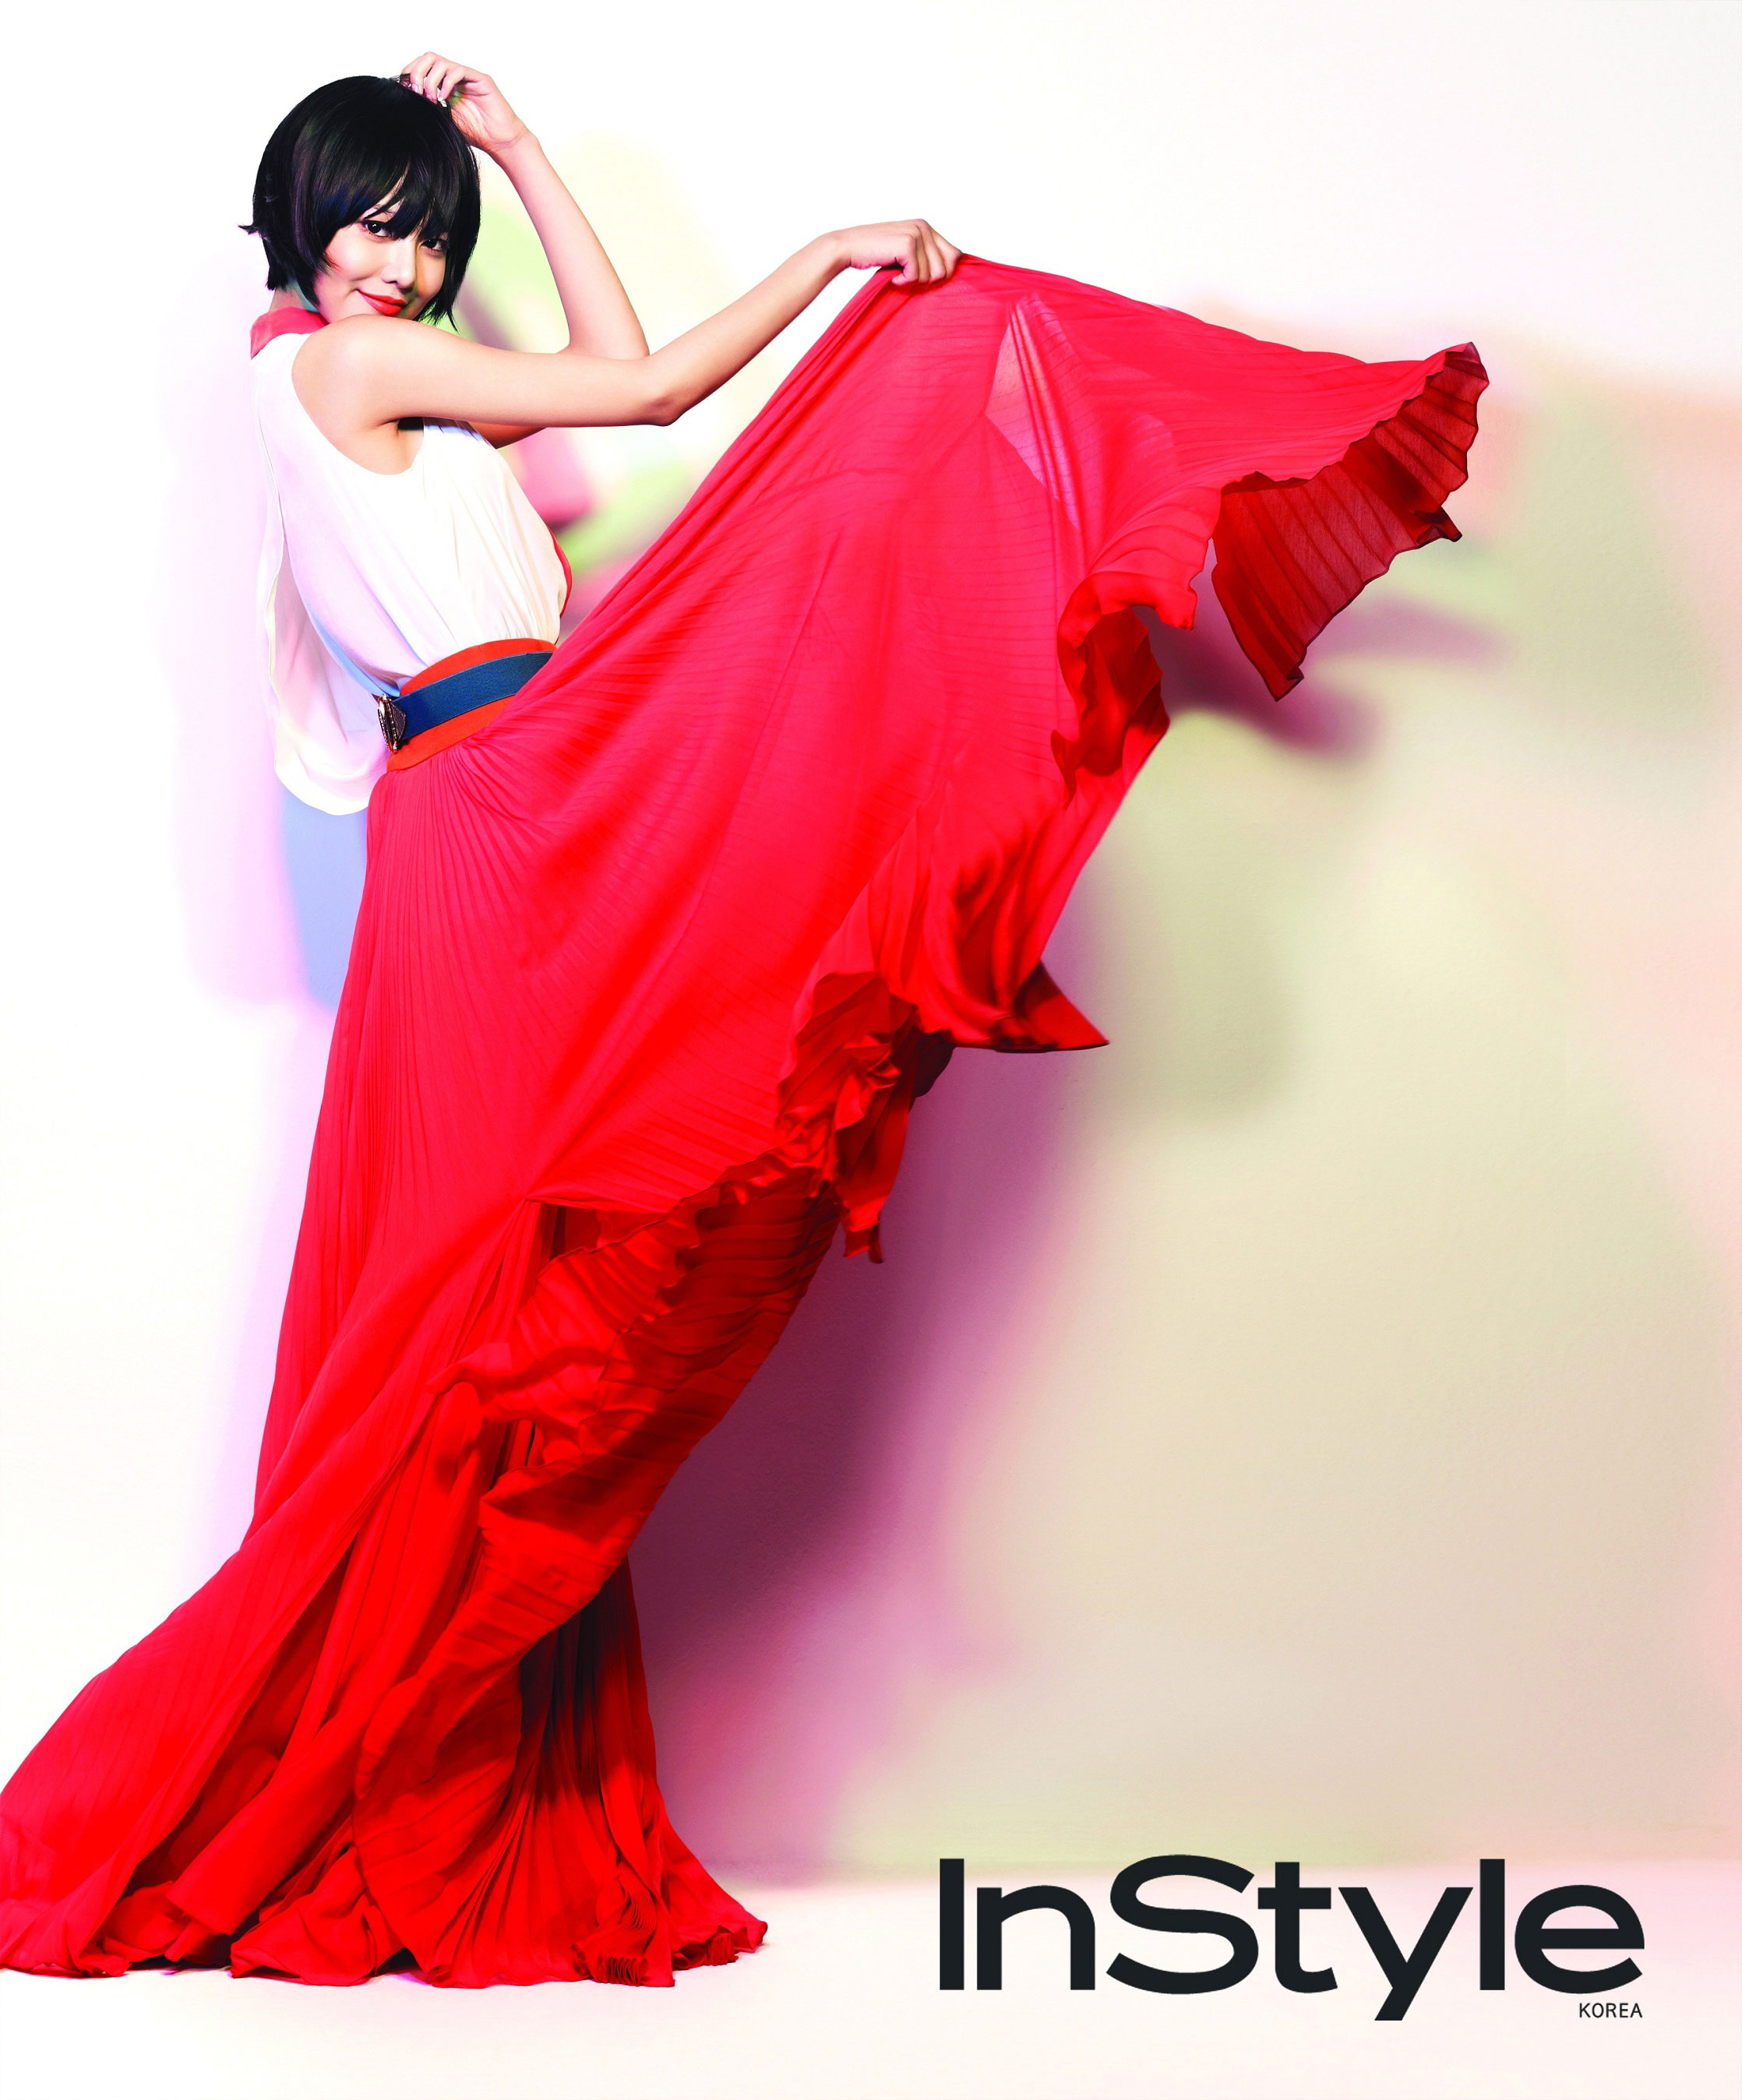 Sooyoung Instyle Magazine